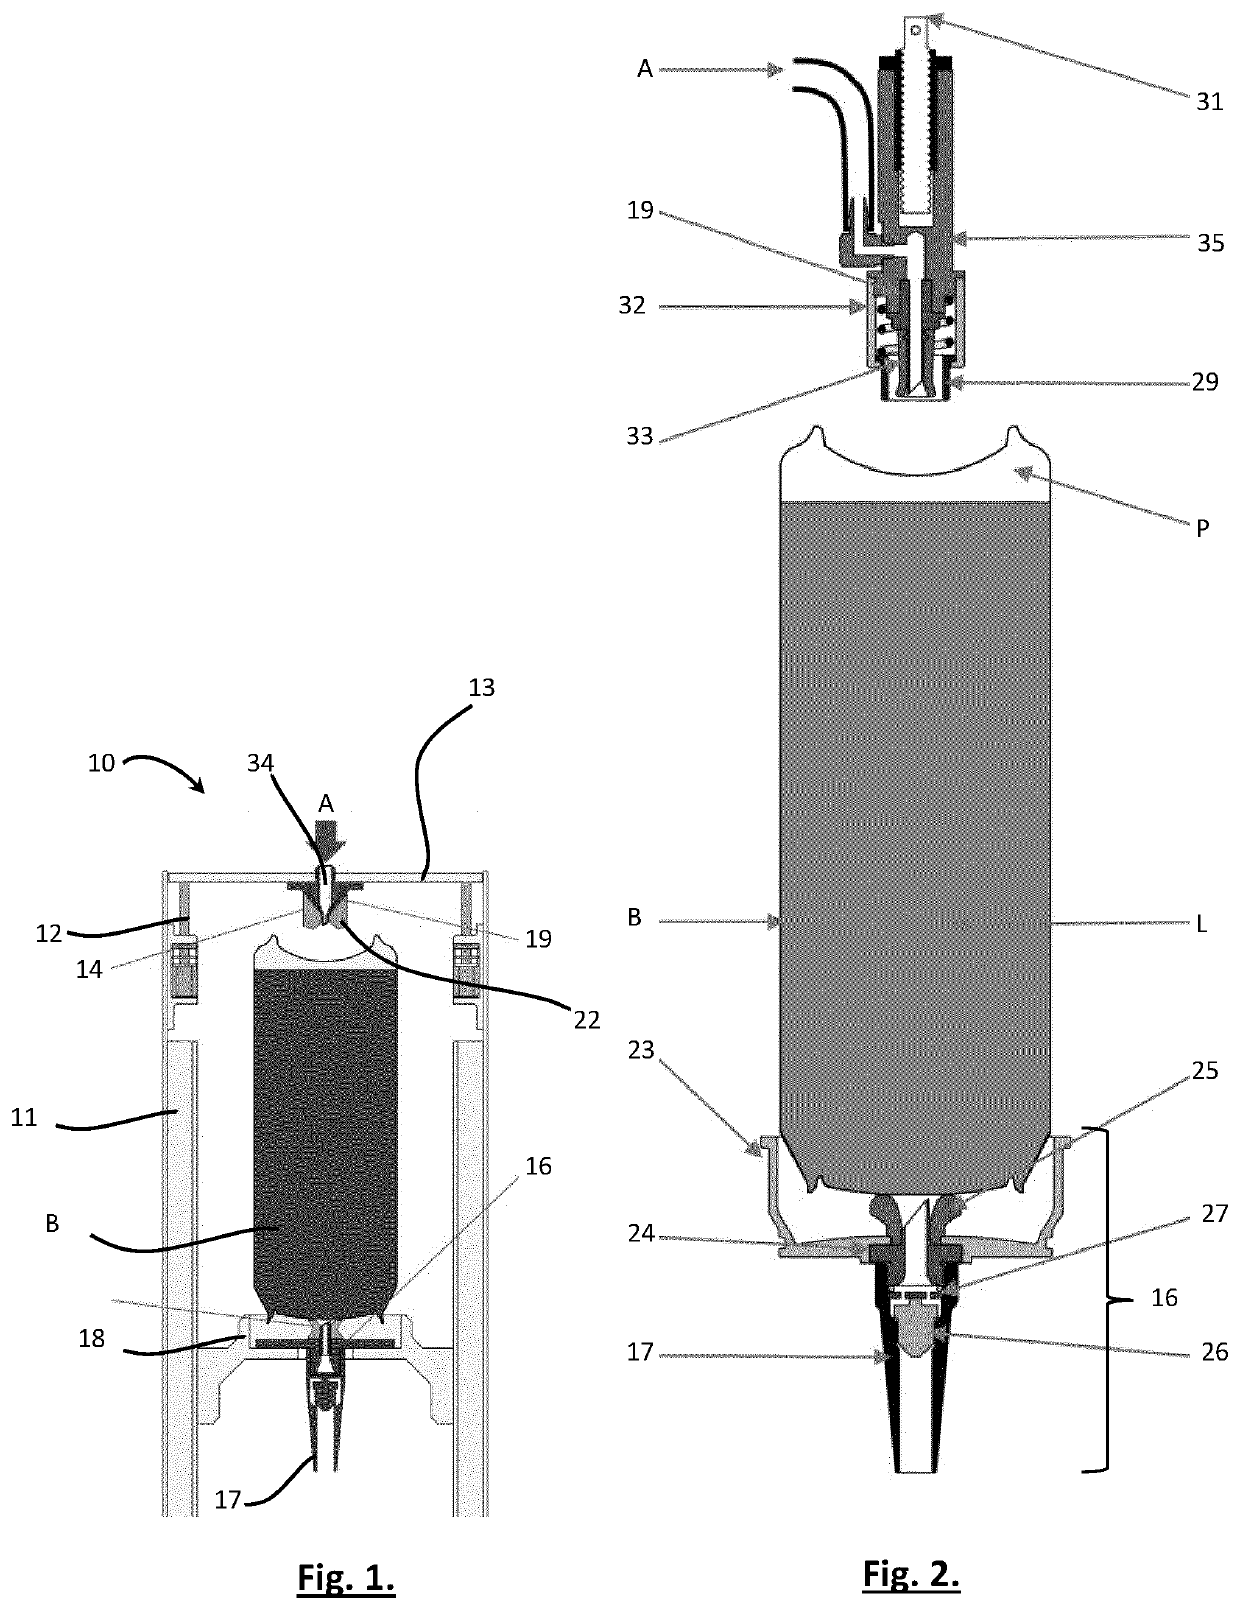 A Beverage Dispense Apparatus and Method Relating to Same